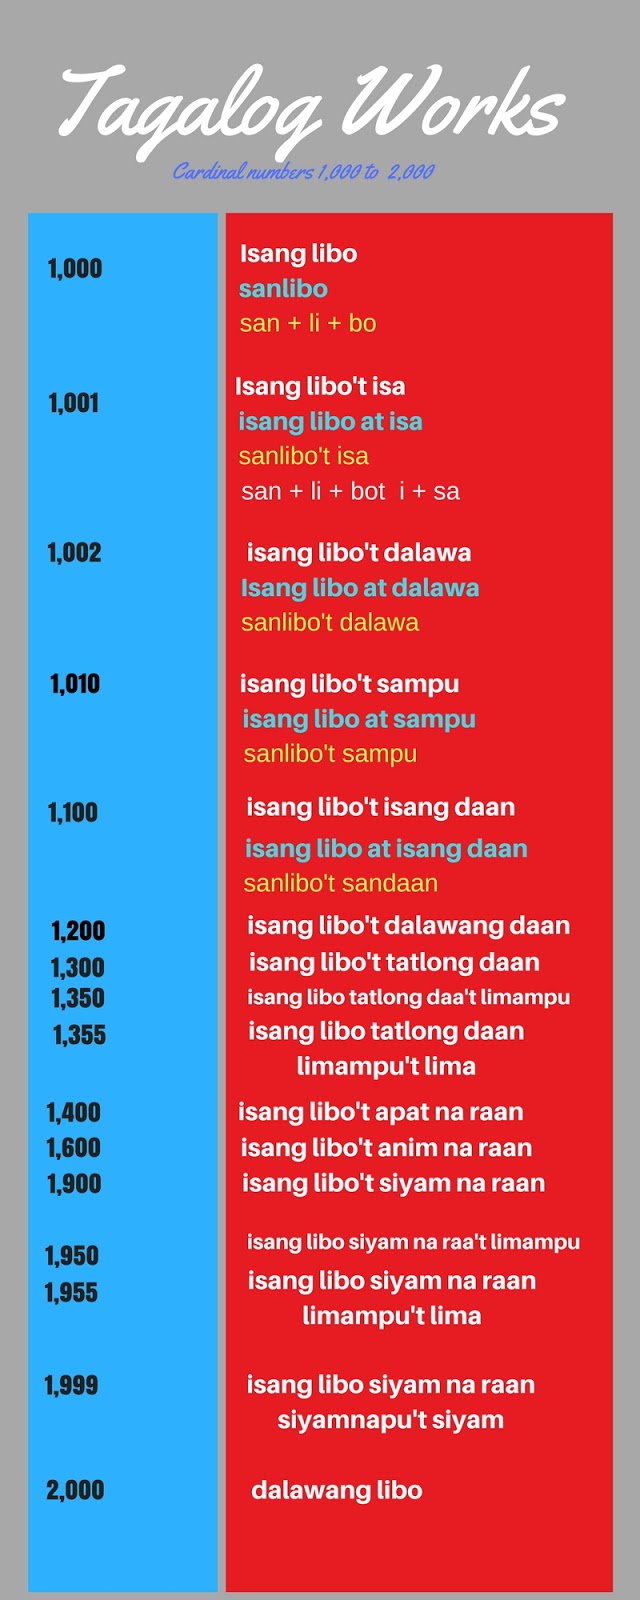 Cardinal numbers from 0 to Trillion in Tagalog.